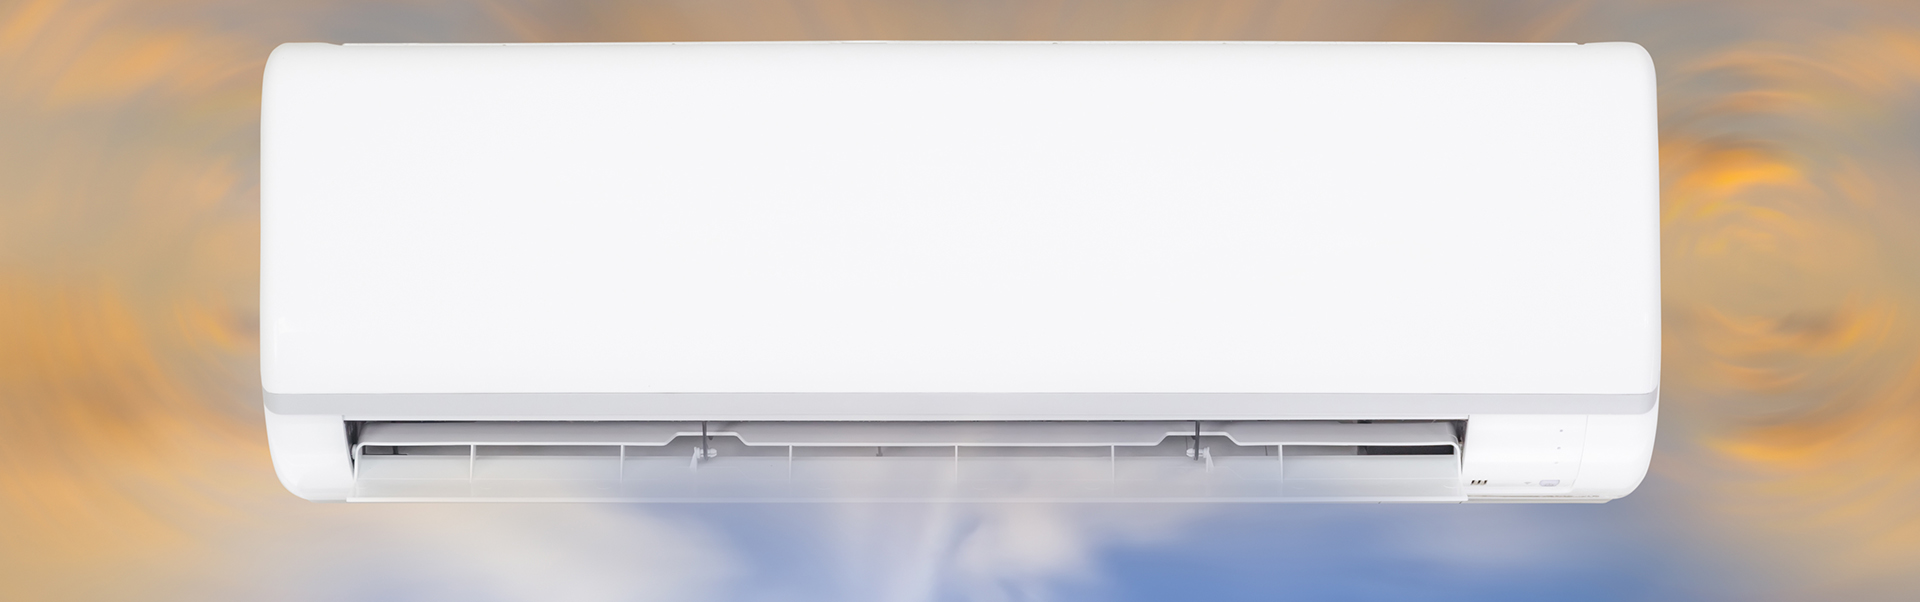 Image of a ductless hvac system - sold by Lockey Heating and Air